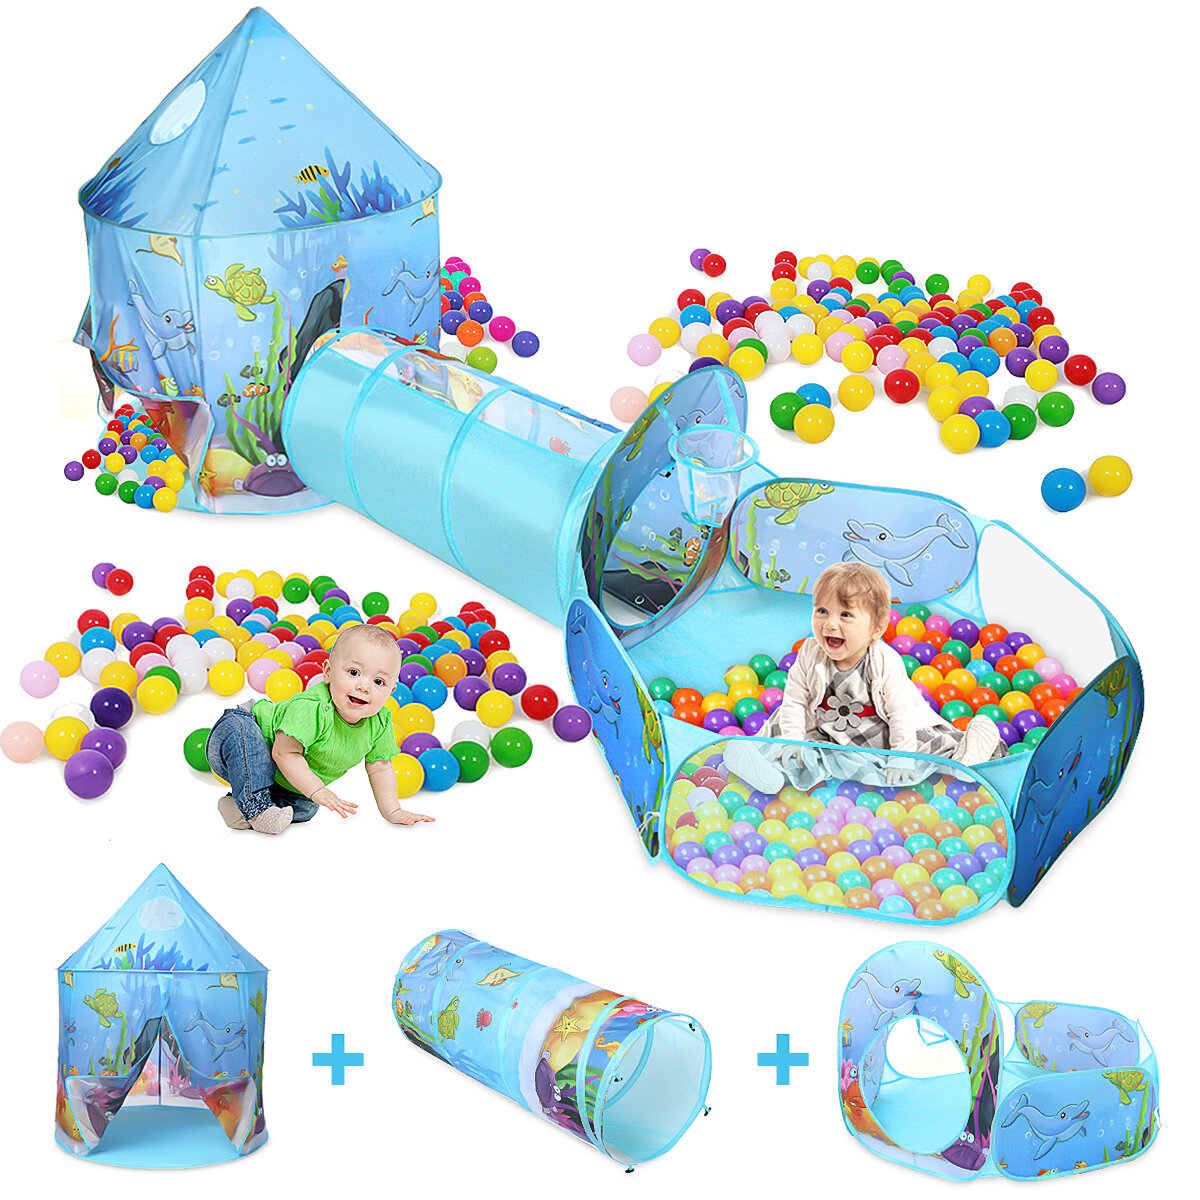 3-in-1 Kids Play Tent Portable Castle Playhouse Play Tunnels Ball Pit Children Game House Gift